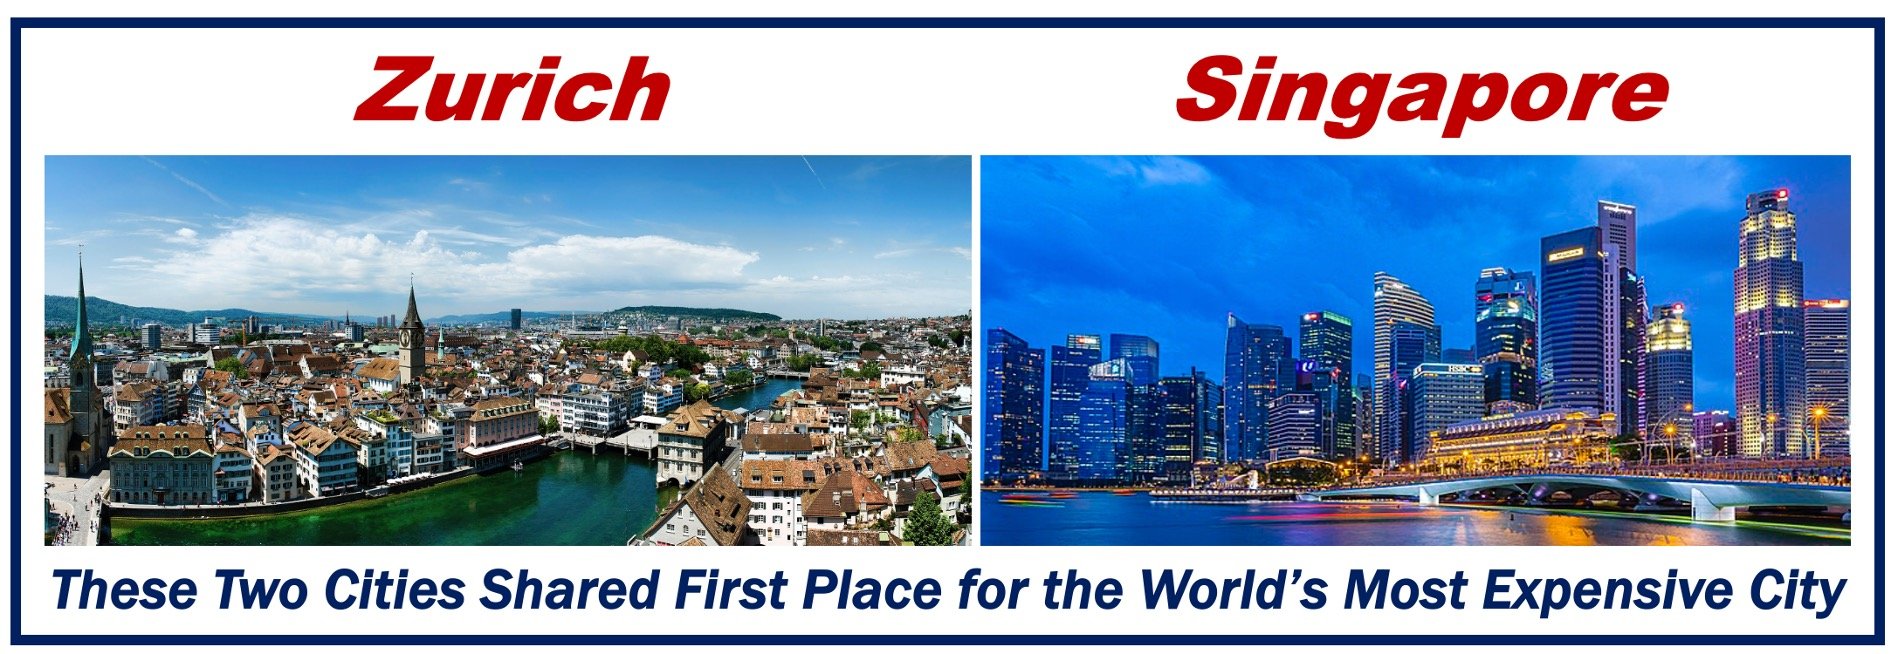 Photos of Singapore and Zurich - they shared first place as the world's most expensive city.